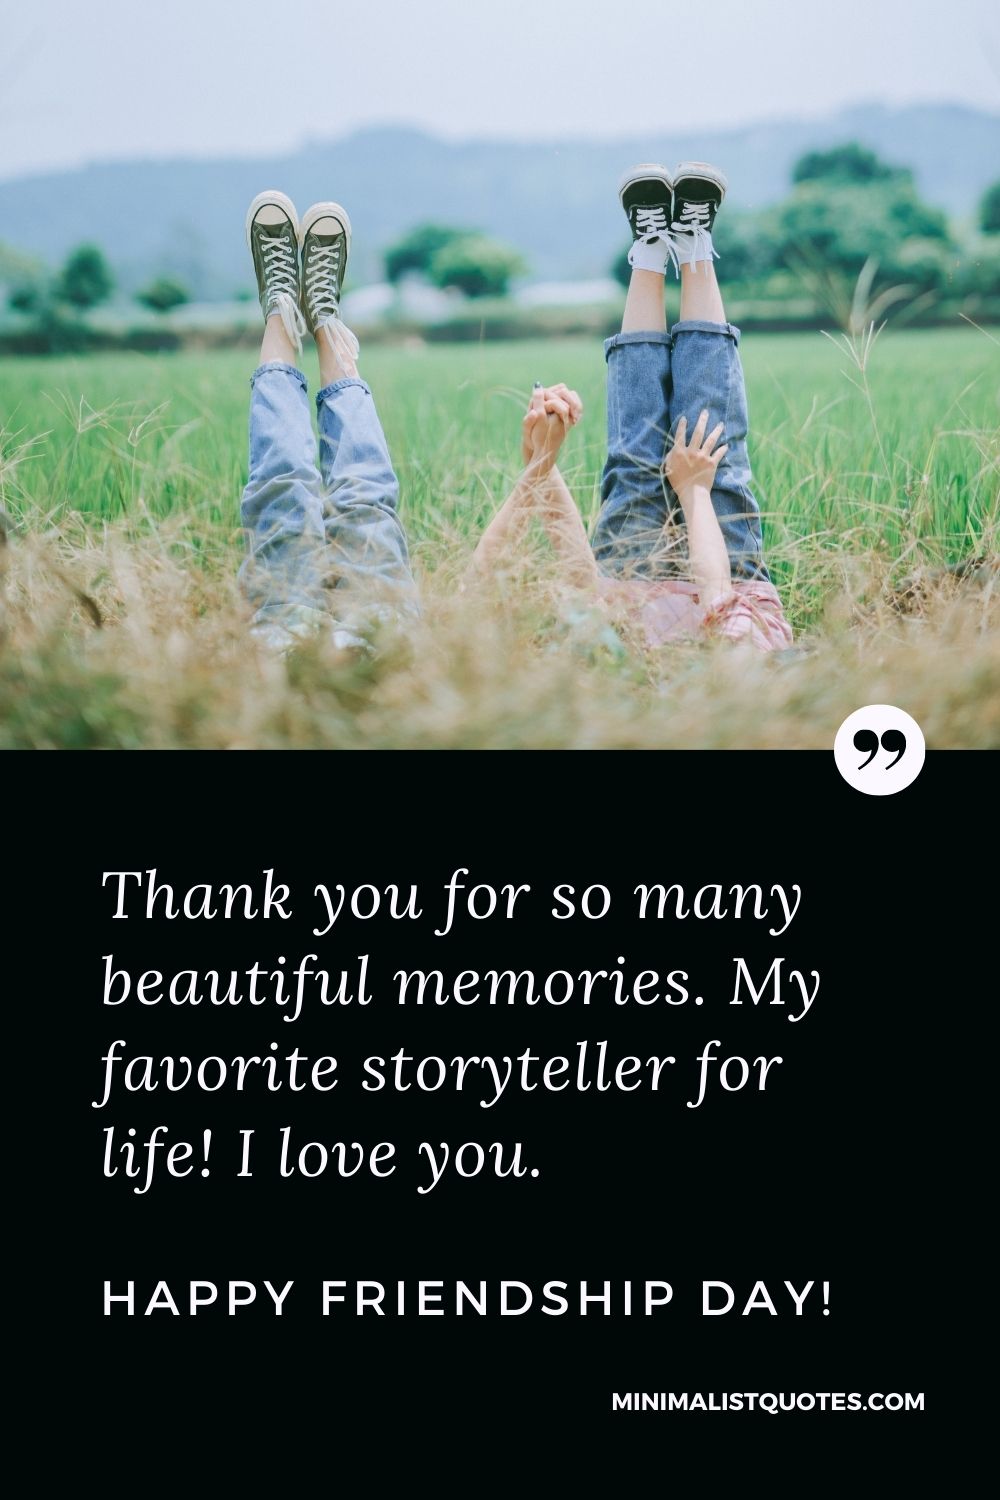 Friendship Day Quote, Wish & Message With Image: Thank you for so many beautiful memories. My favorite storyteller for life! I love you. Happy Friendship Day!